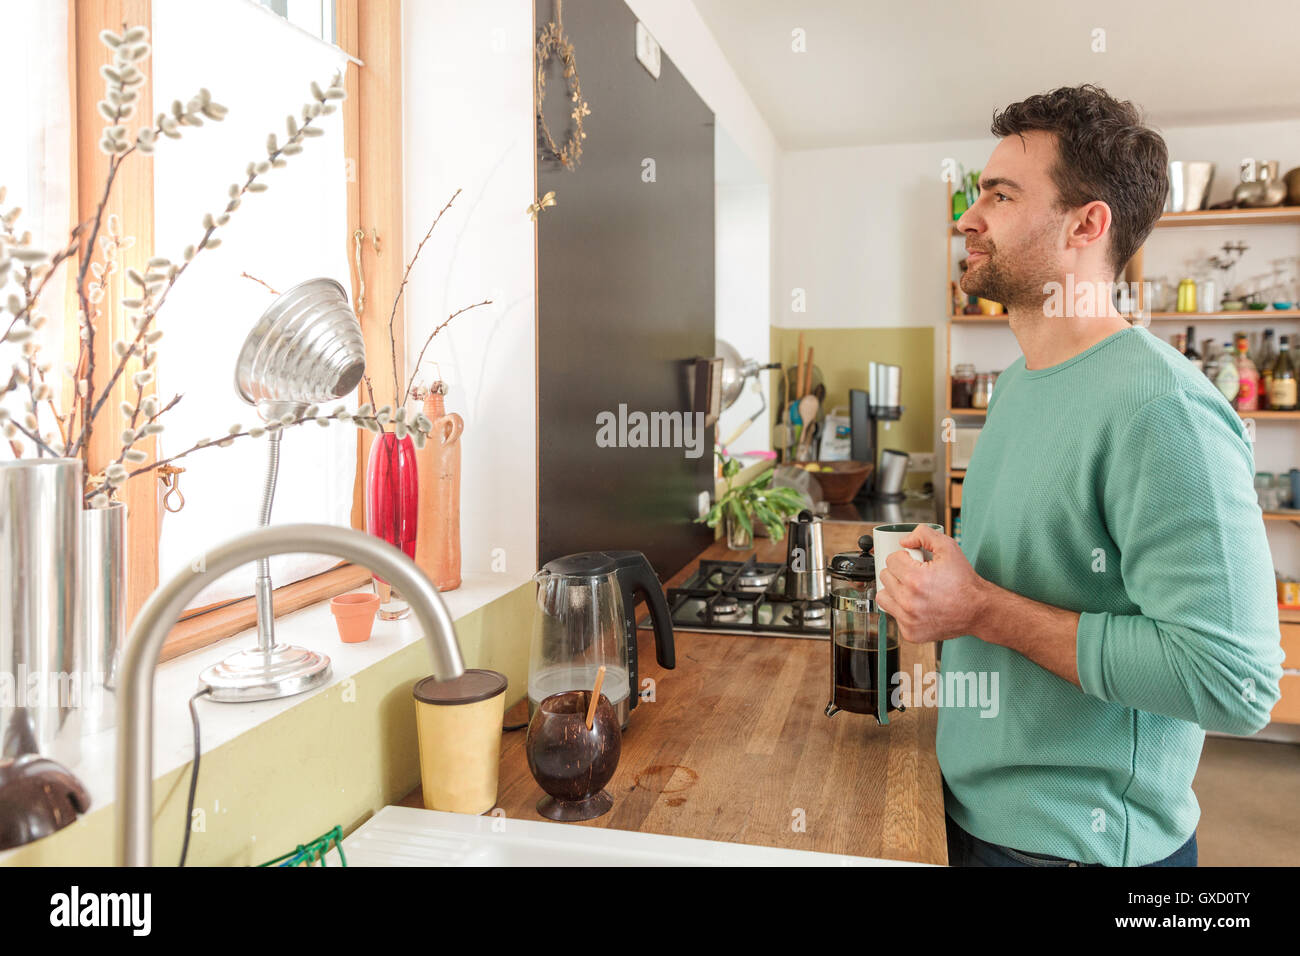 Man in kitchen holding coffee cup looking out of window Stock Photo